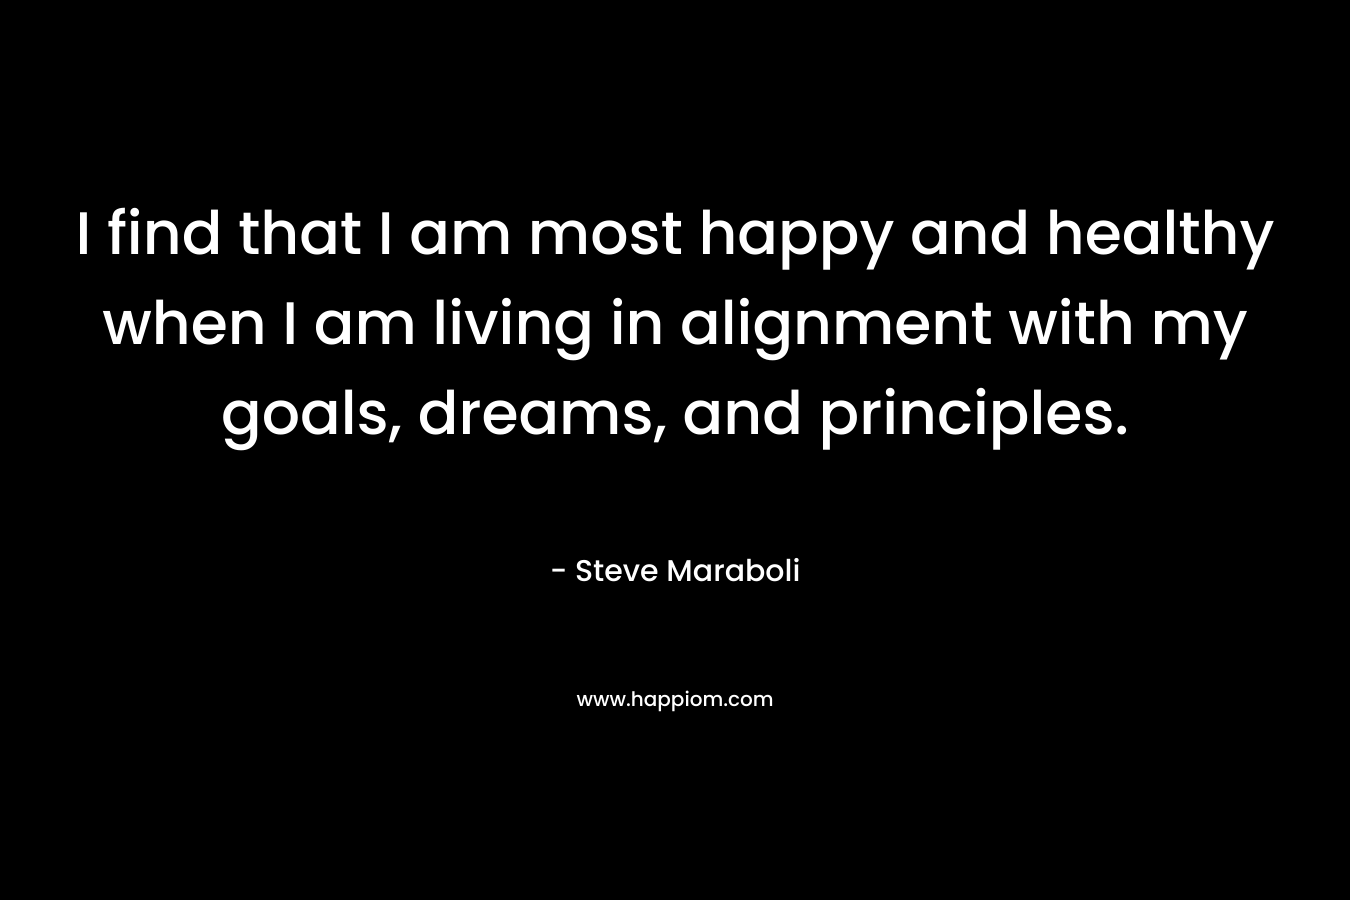 I find that I am most happy and healthy when I am living in alignment with my goals, dreams, and principles.